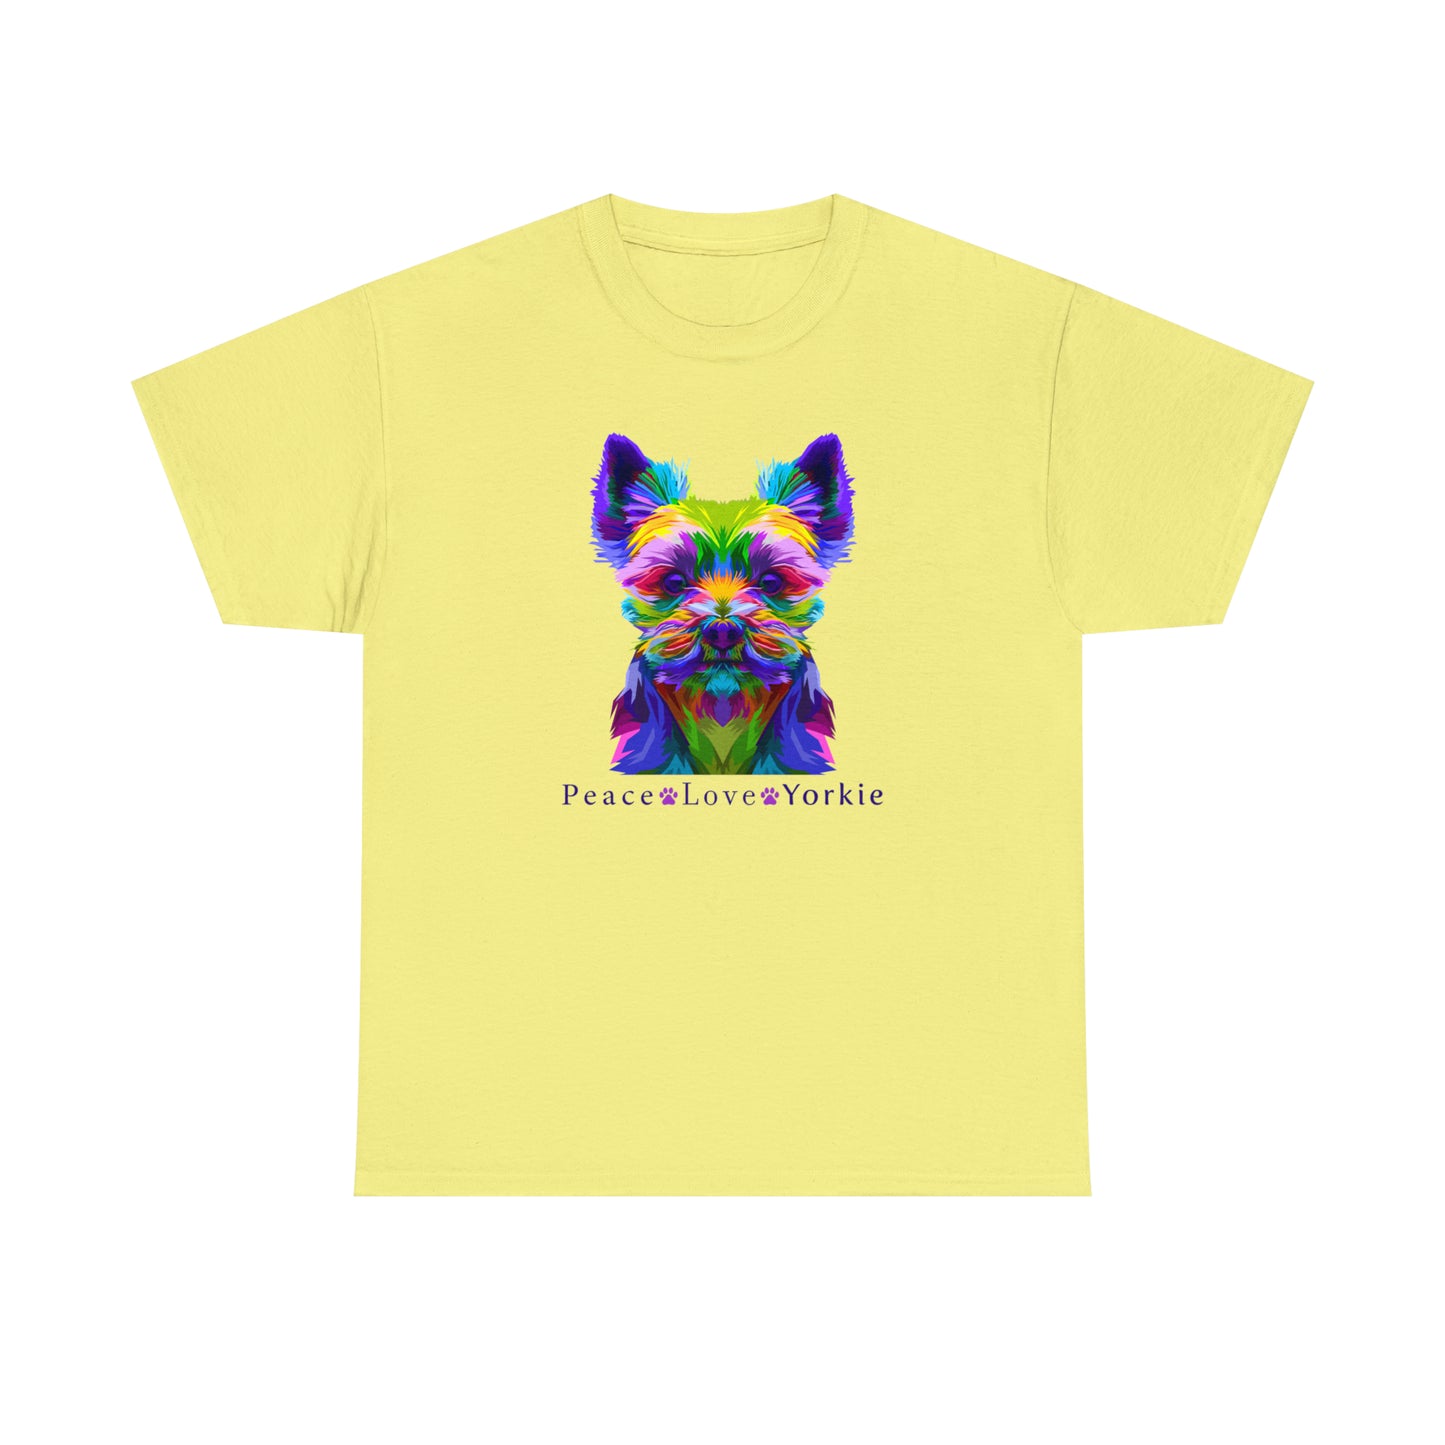 Yorkie T-Shirt For Yorkshire Terrier TShirt For Favorite Dog Breed T Shirt For Peace Love Yorkie Shirt For Dog Lover Gift